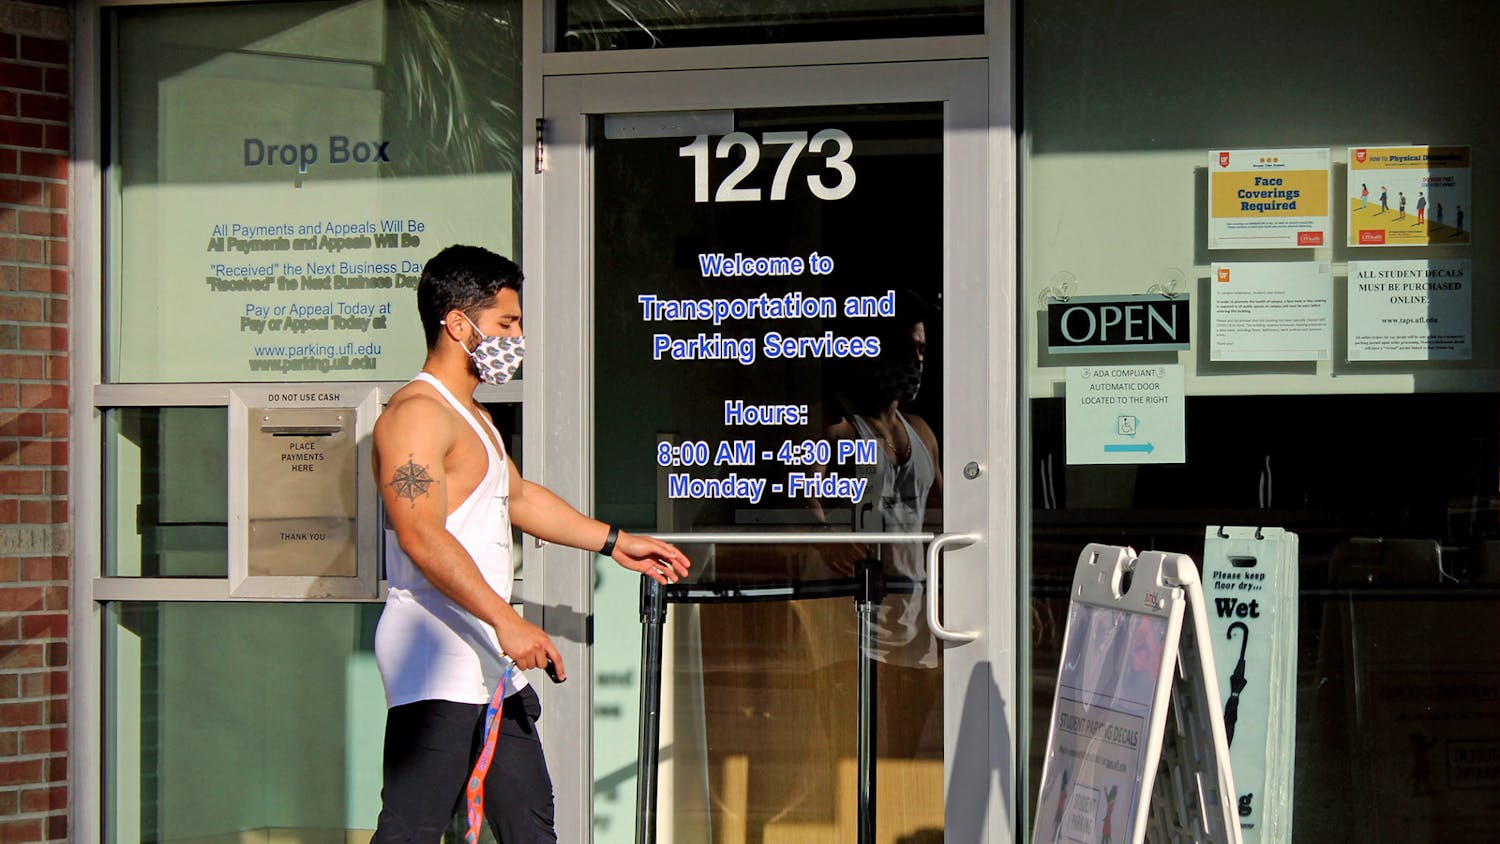 Julian Cruz, 20, applied physiology and kinesiology junior walks into the UF Transportation and Parking Services office on Thursday, Jan. 14, 2021. He was applying for a parking decal for the UF Health Shands Hospital parking lot.